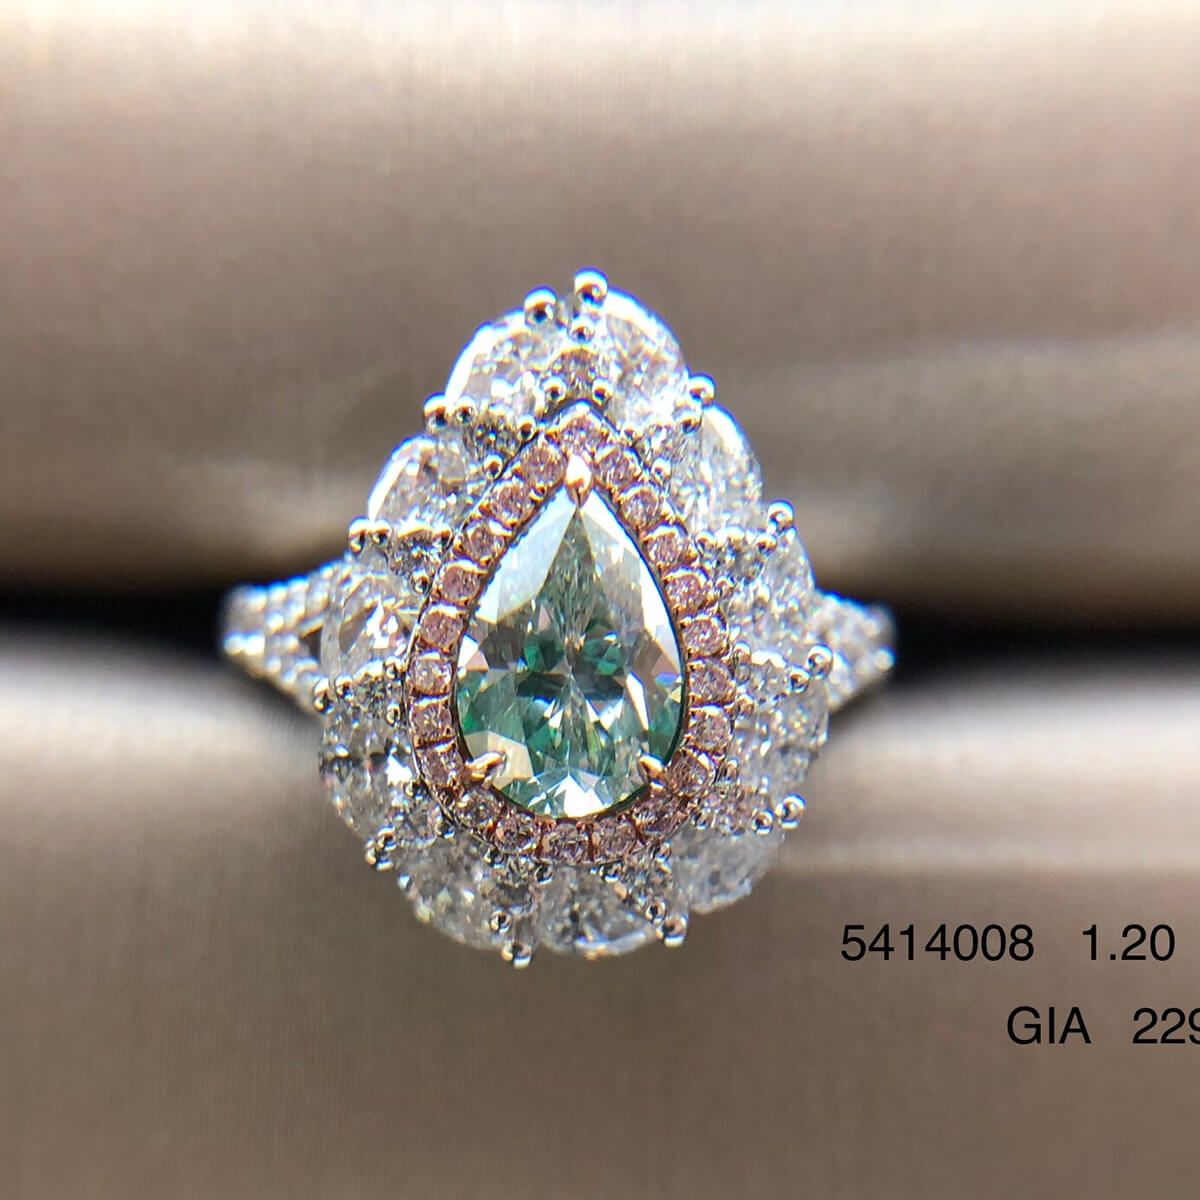 Very Light Yellow Green Diamond Ring, 1.20 Ct. (2.69 Ct. TW), Pear shape, GIA Certified, 2298120940